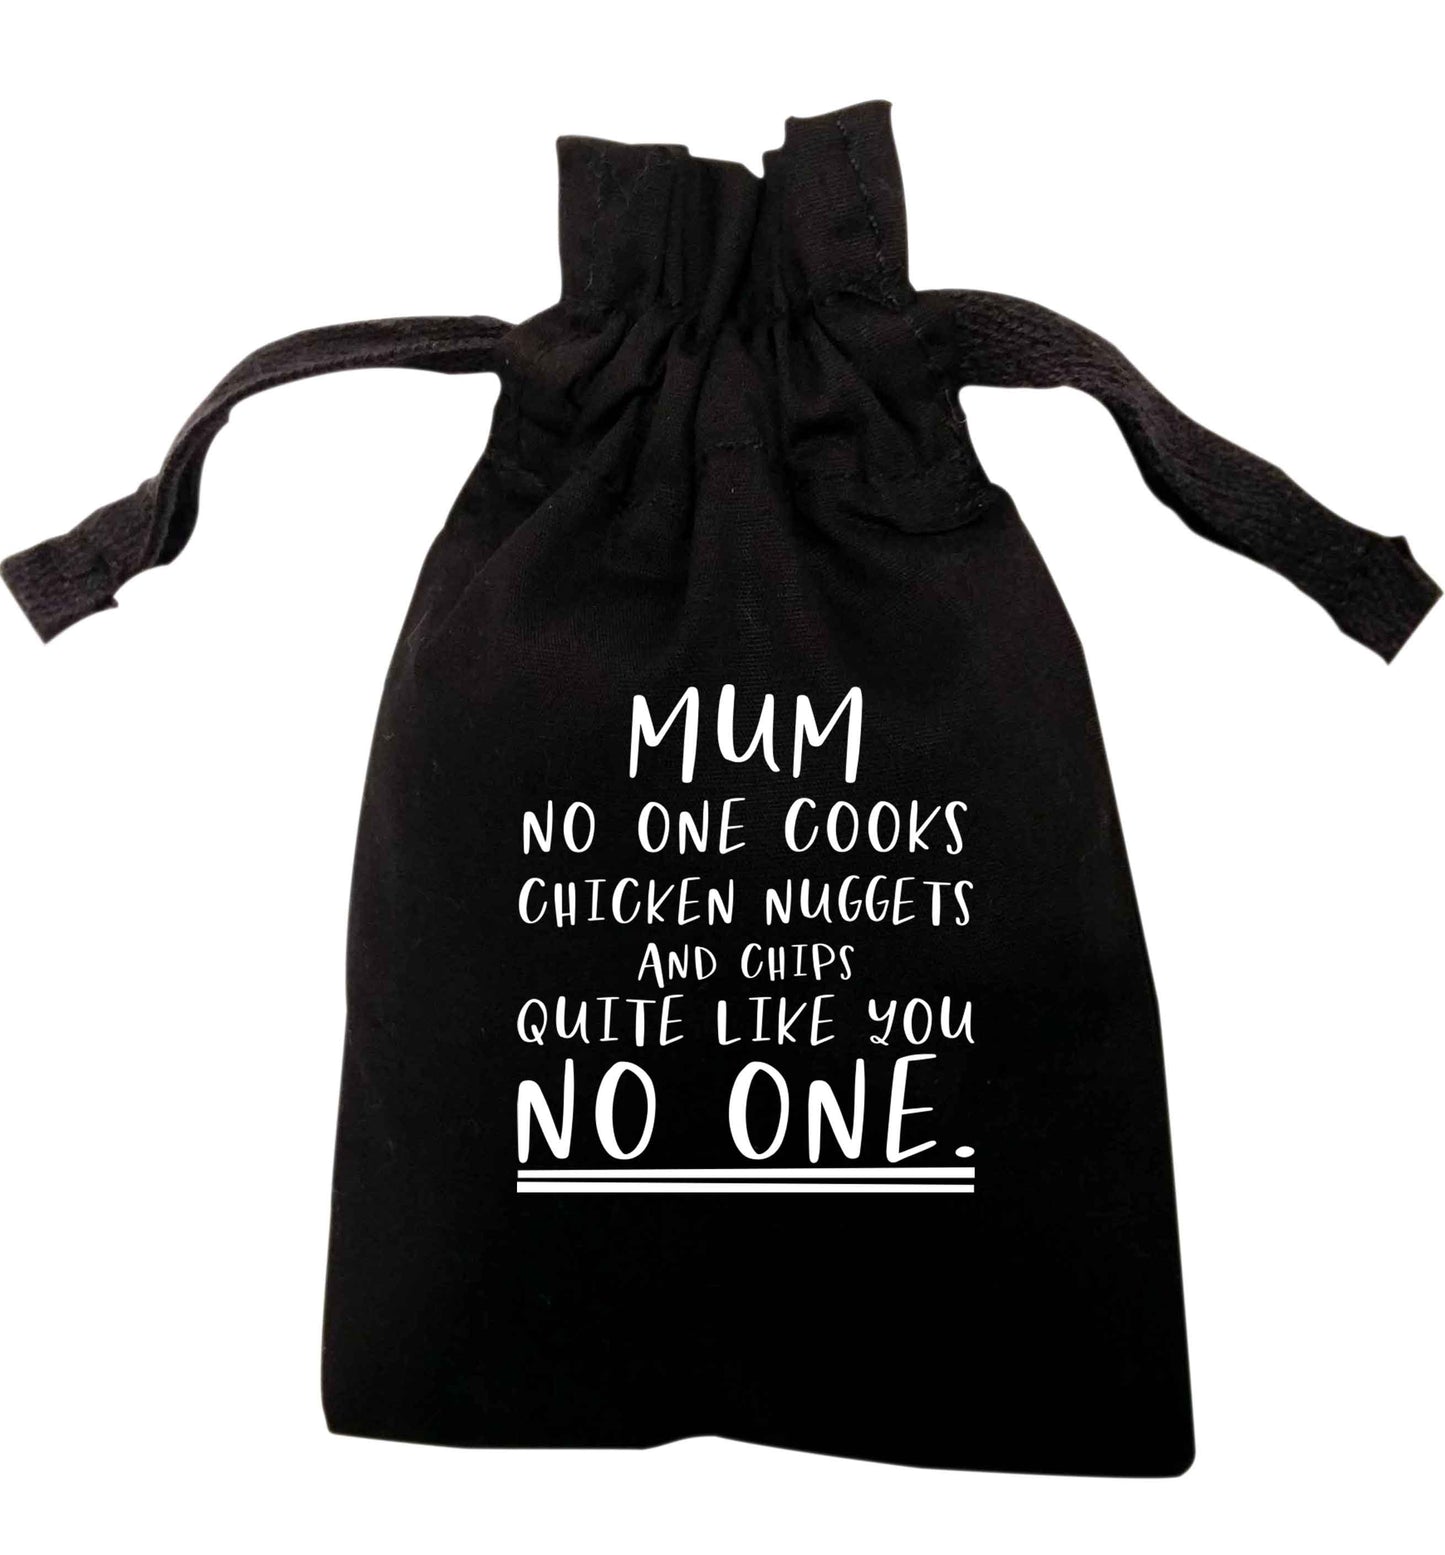 Mum no one cooks chicken nuggets and chips like you no one | XS - L | Pouch / Drawstring bag / Sack | Organic Cotton | Bulk discounts available!